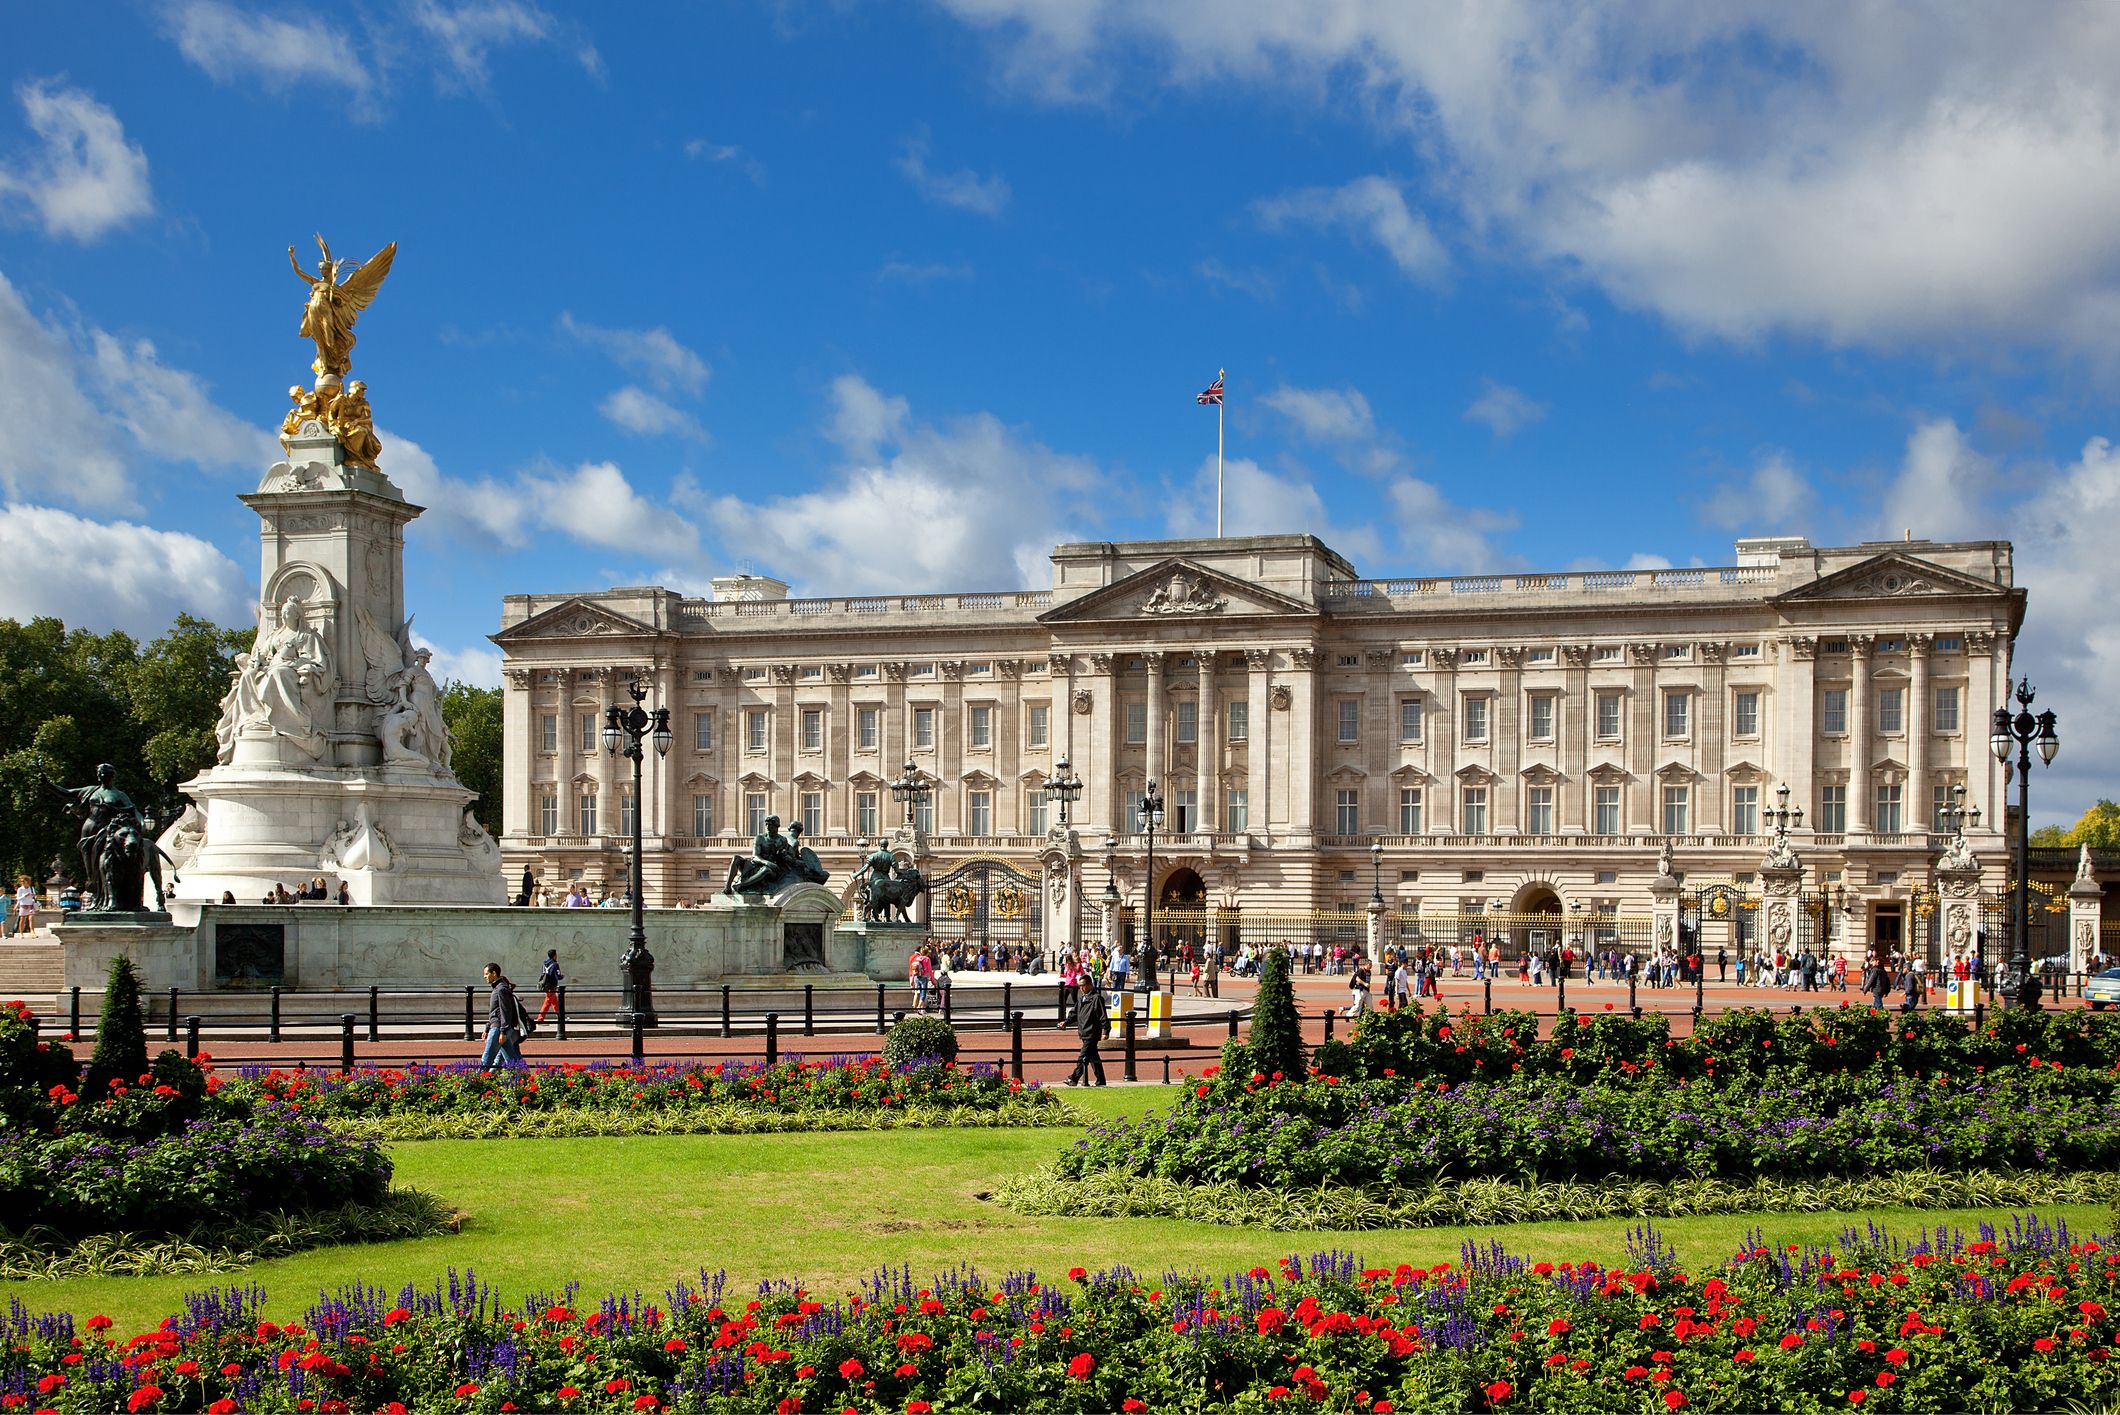 Behind-the-Scenes Video Shows the Basement of Buckingham Palace - Buckingham Palace Restoration